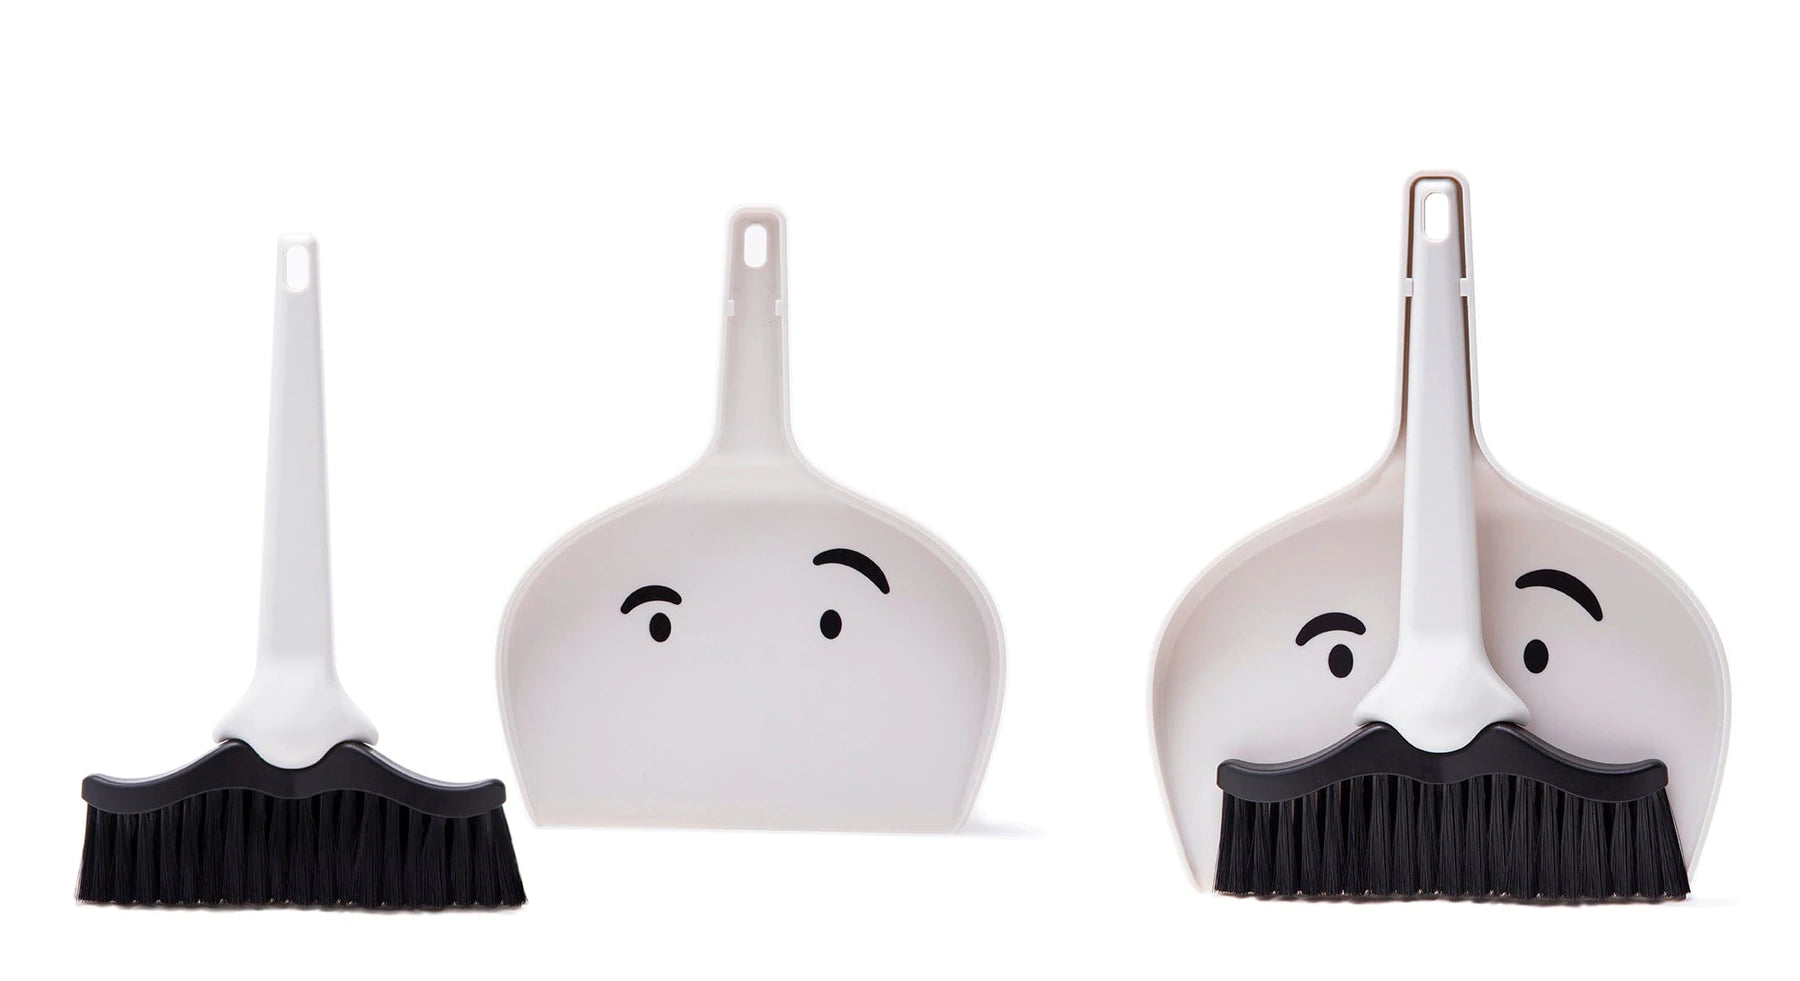 Two dustpan and broom sets both with a face printed on it